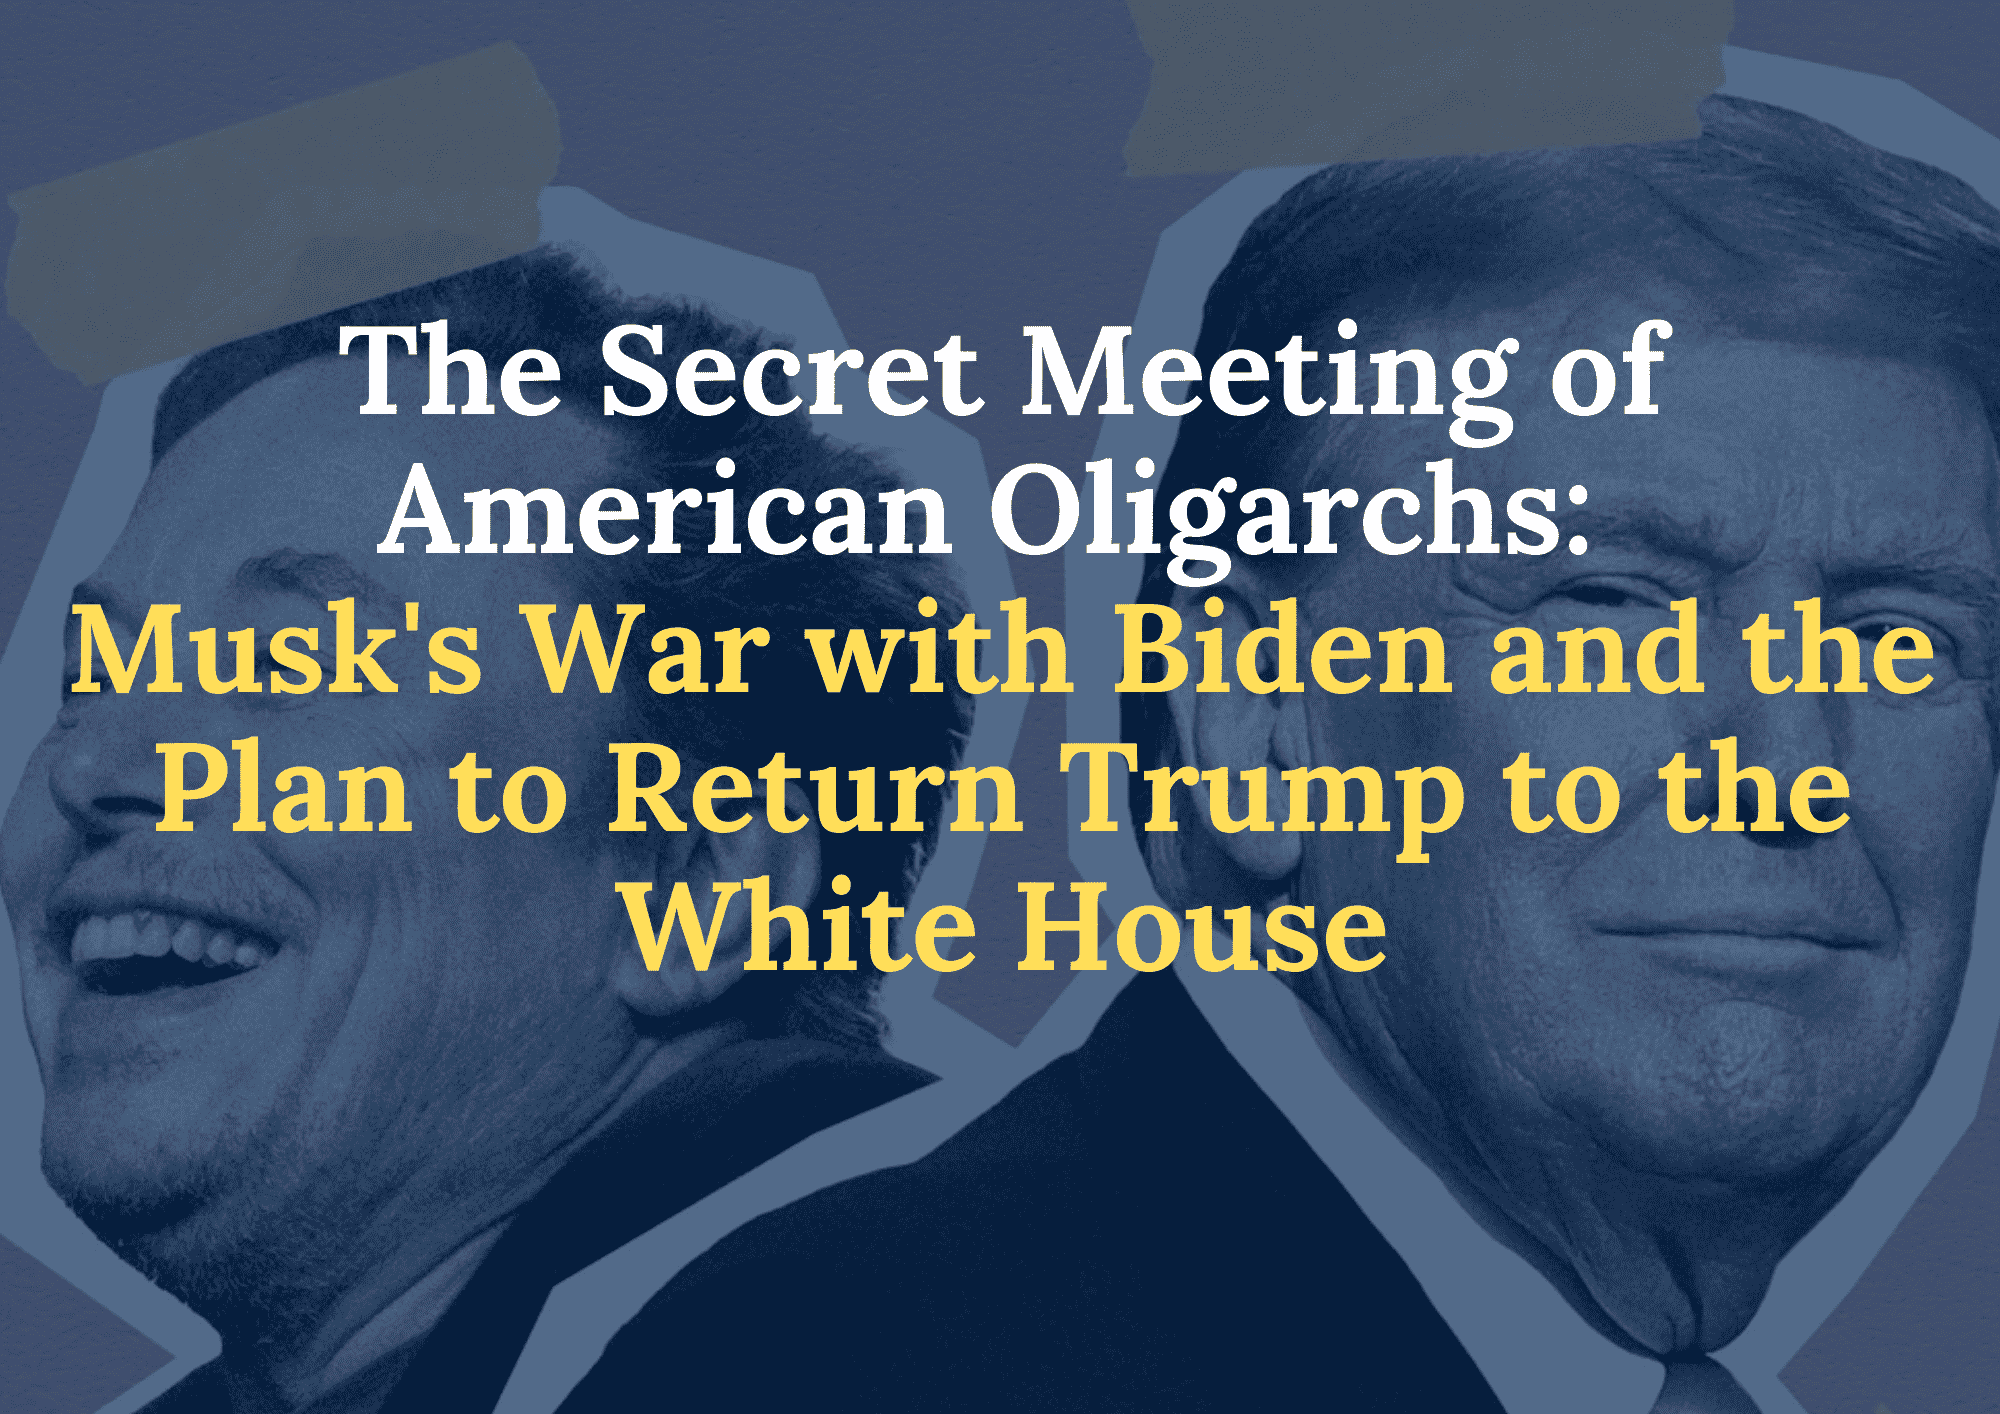 The Secret Meeting of American Oligarchs: Musk’s War with Biden and the Plan to Return Trump to the White House